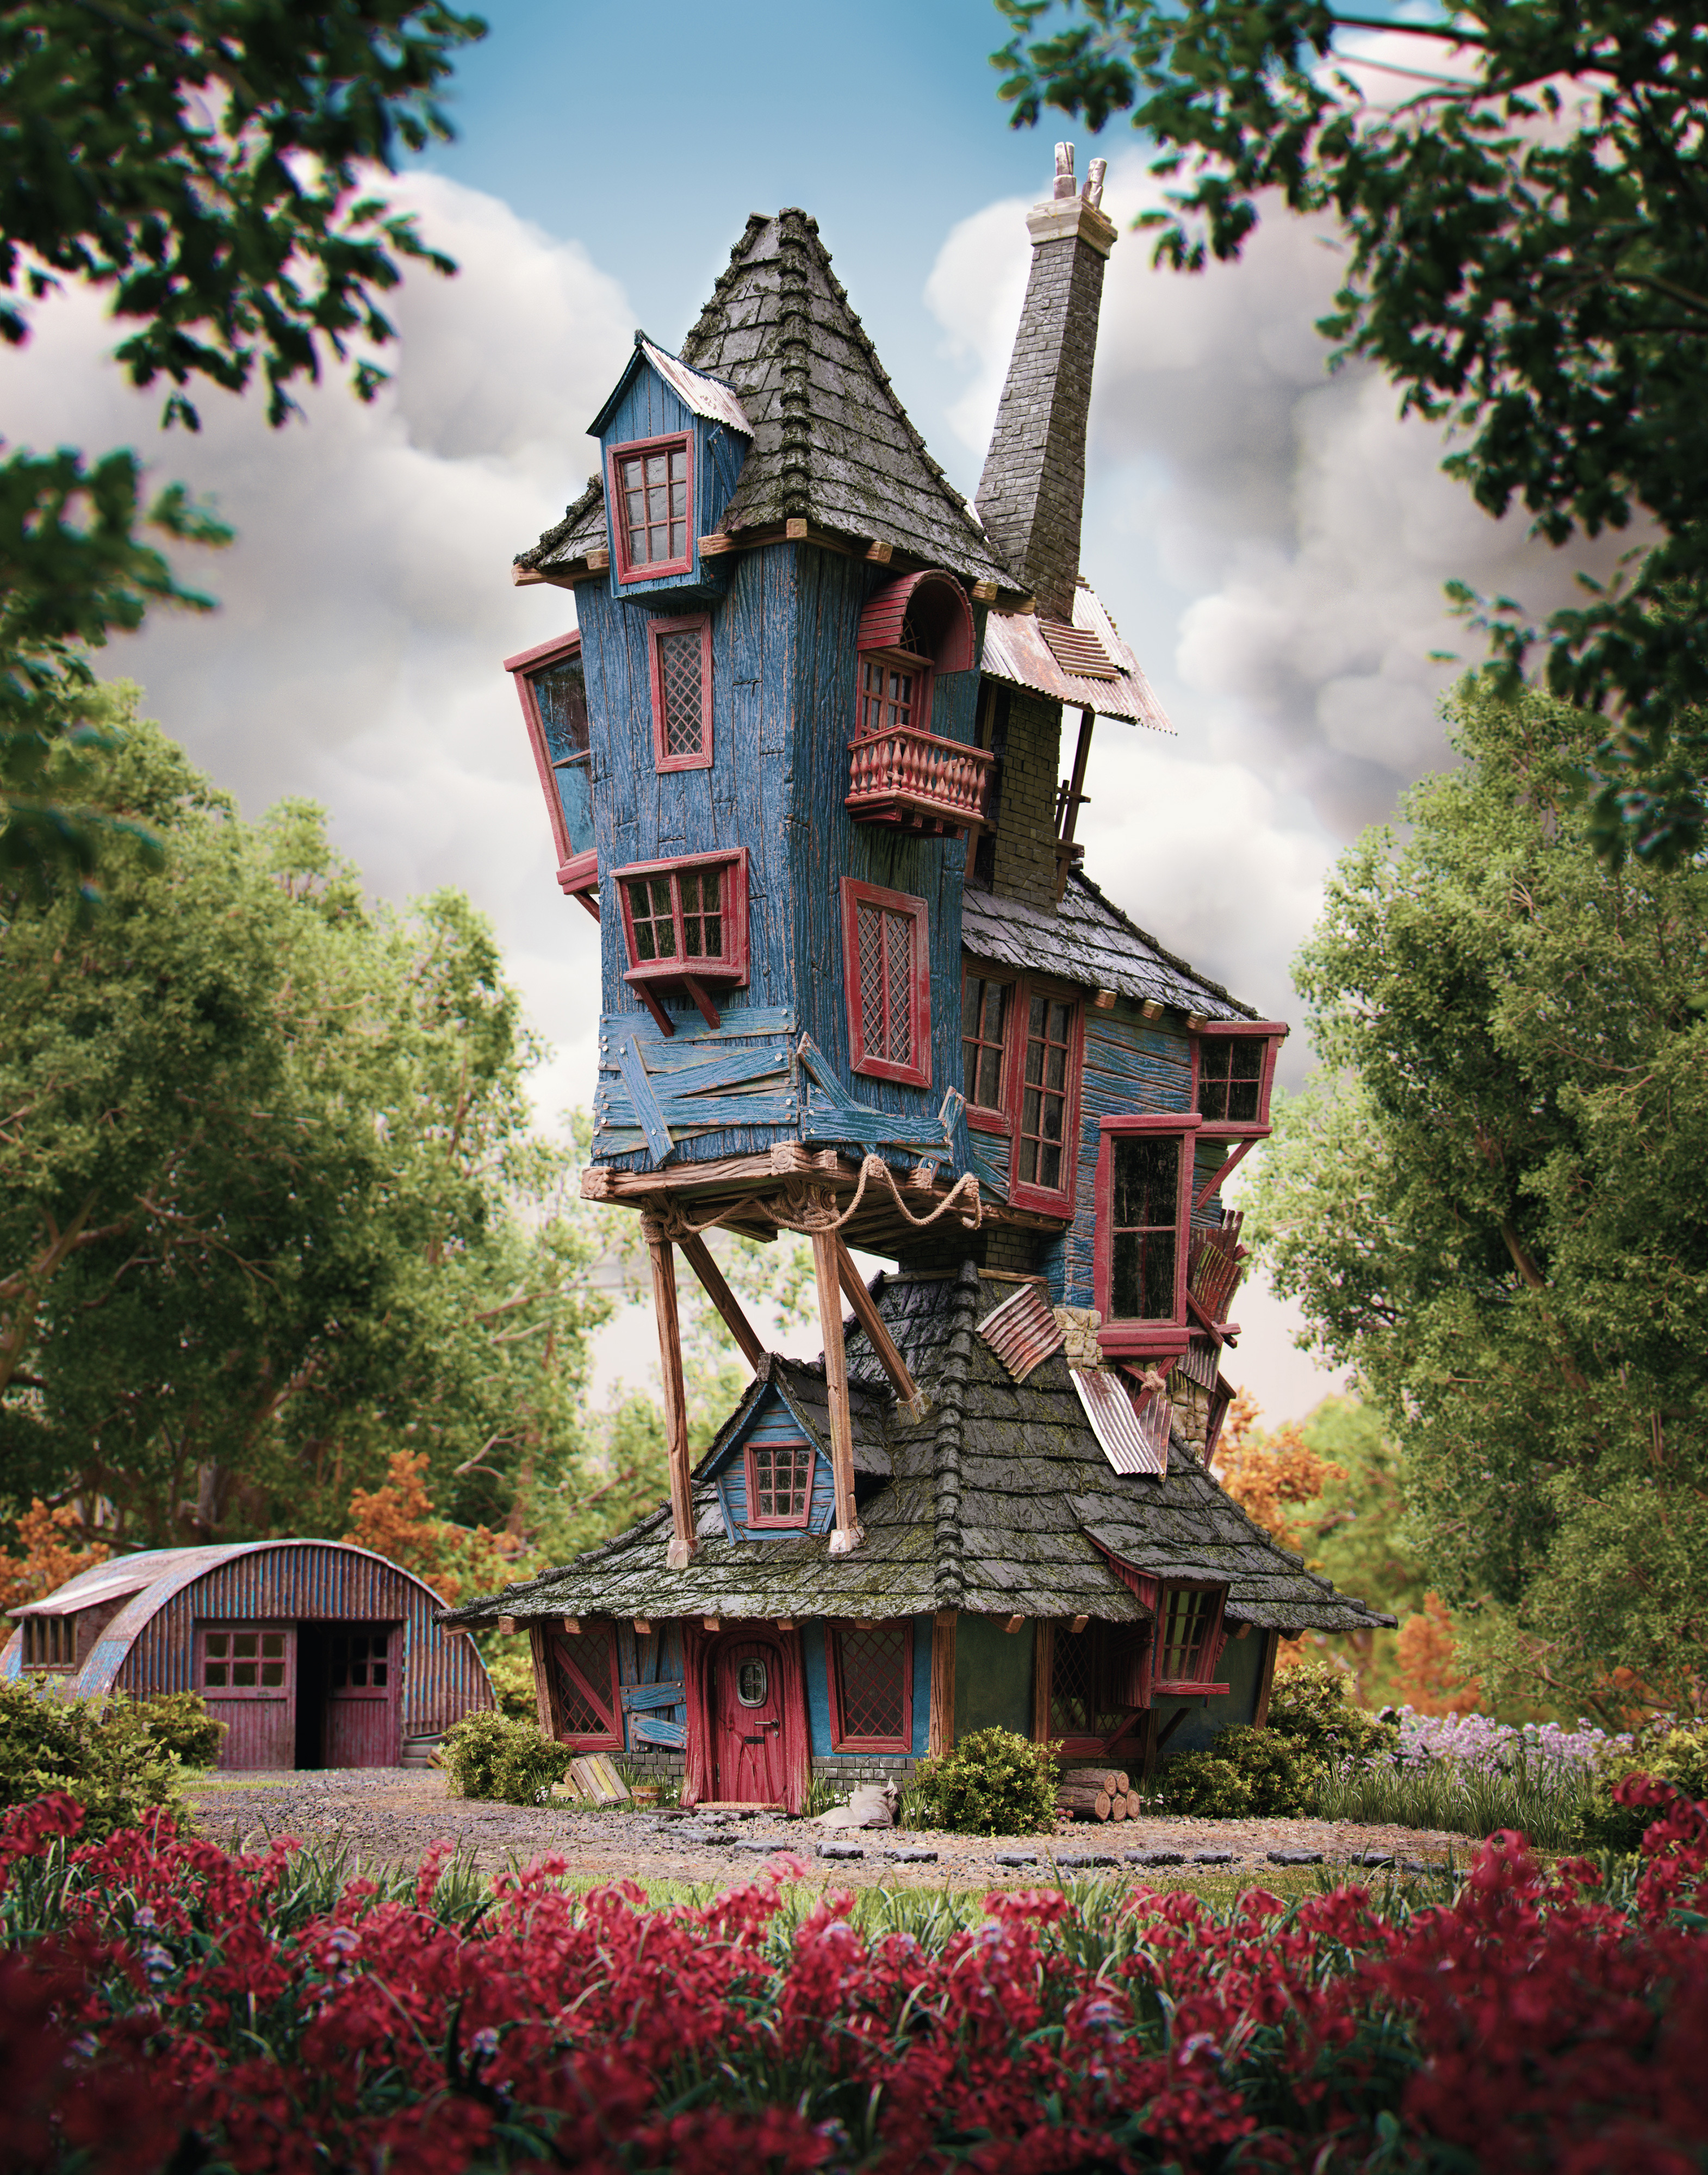 d maya zbrush substance painter redshift photoshop Harry Potter The Burrow Weasleys family home rafael Z chies